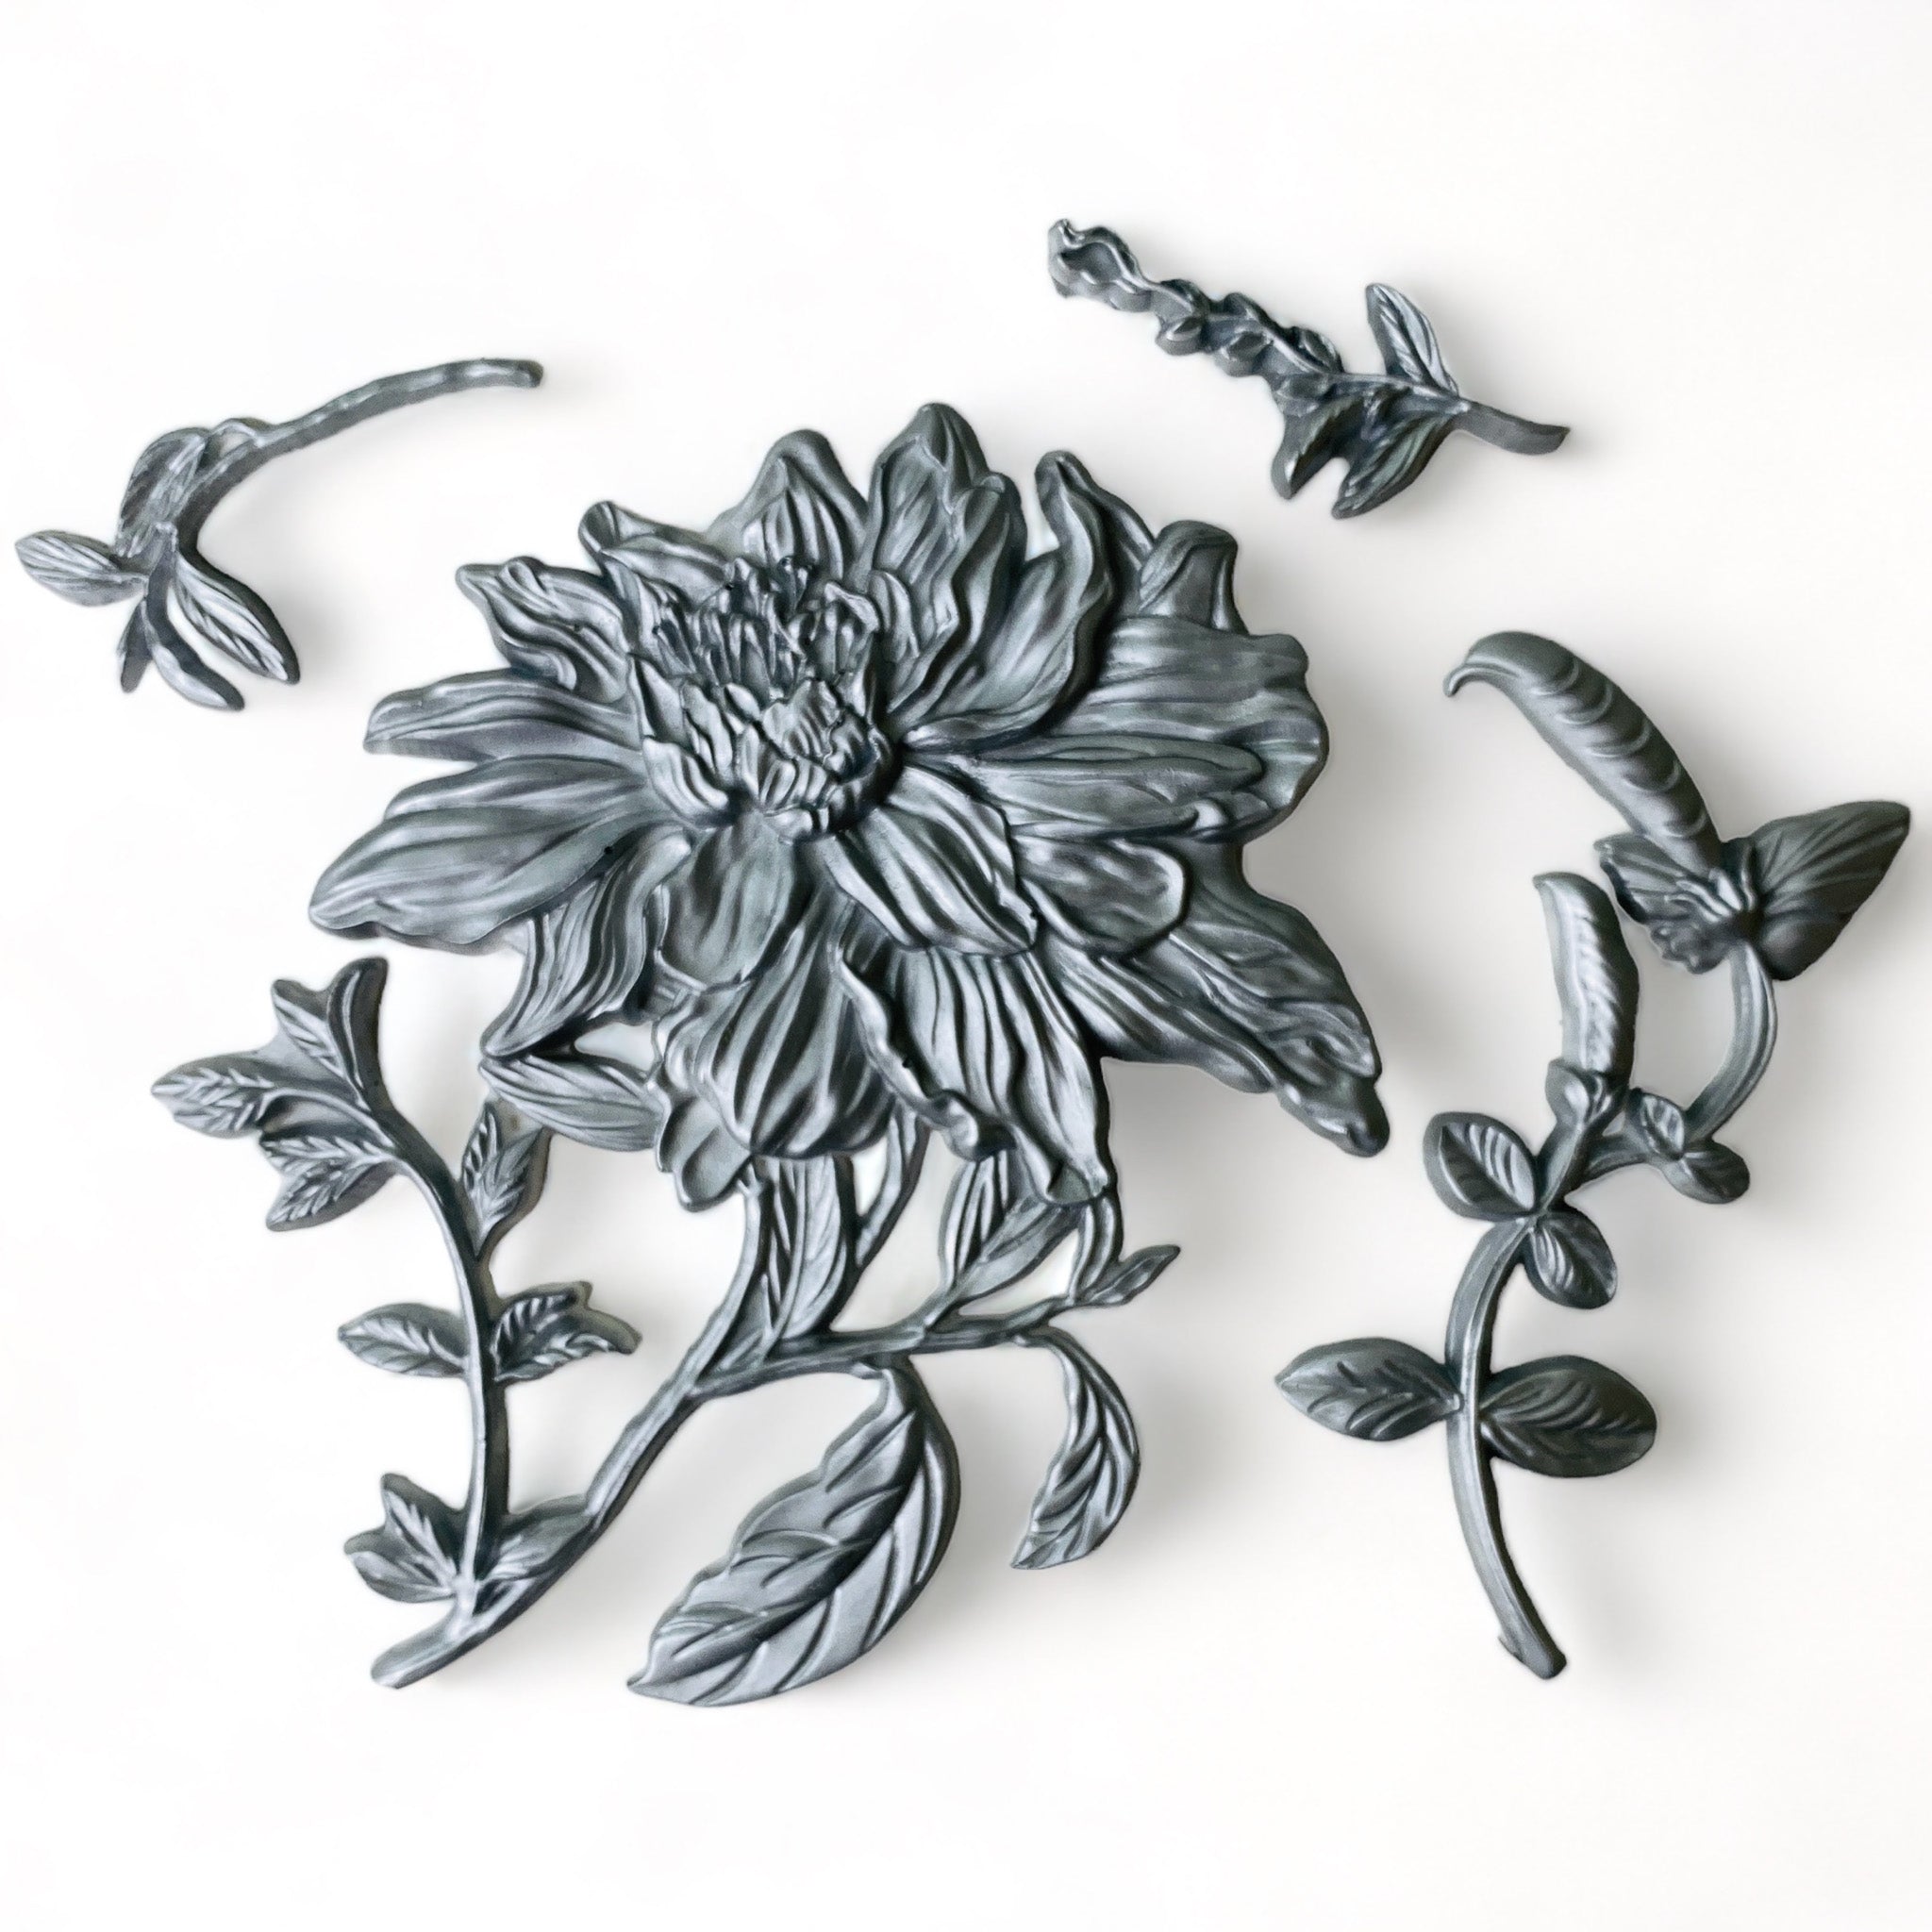 Silver-colored silicone mold castings of a large flower bloom with foliage are against a white background.